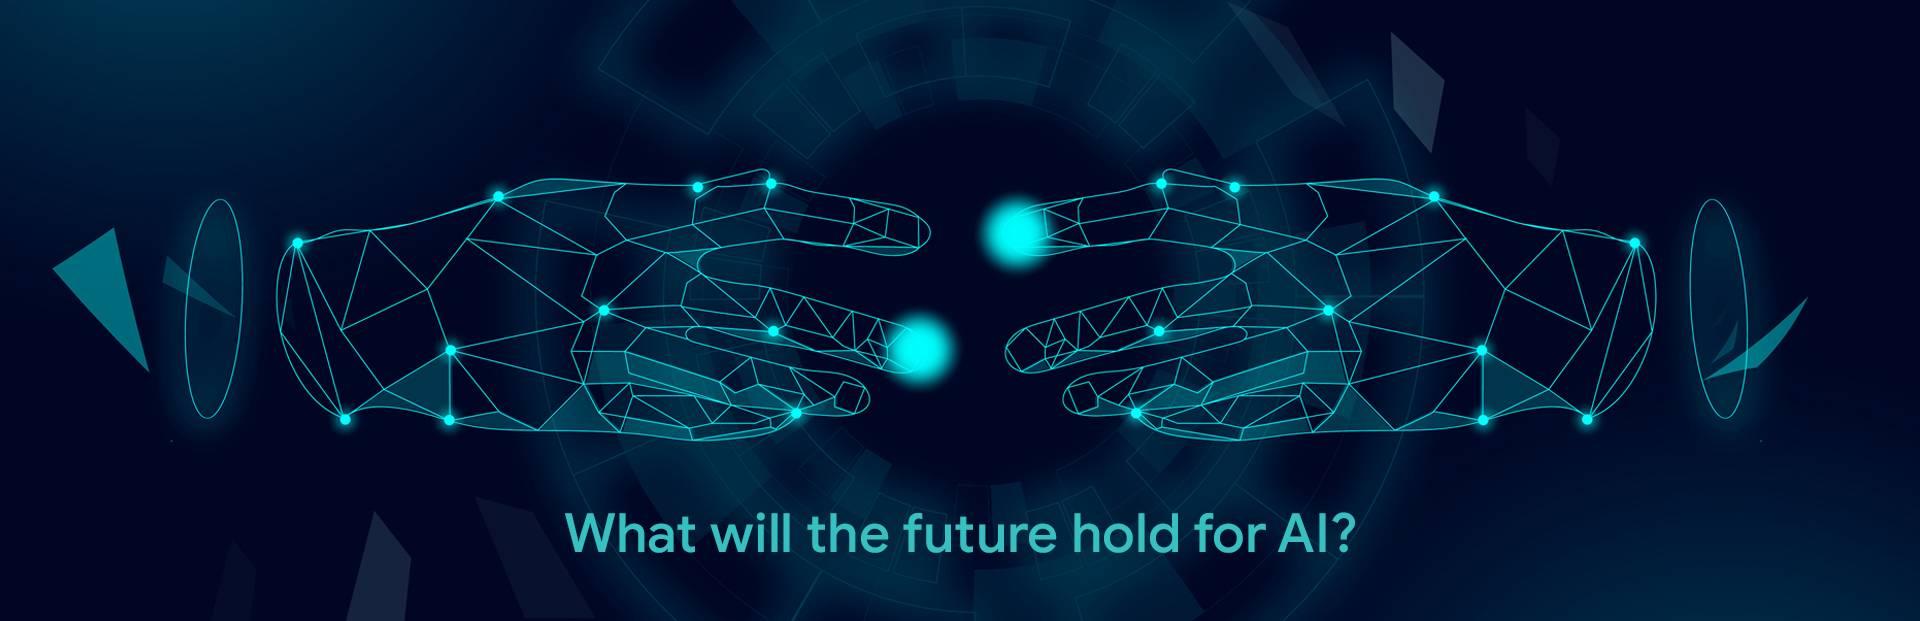 What will the future hold for AI?